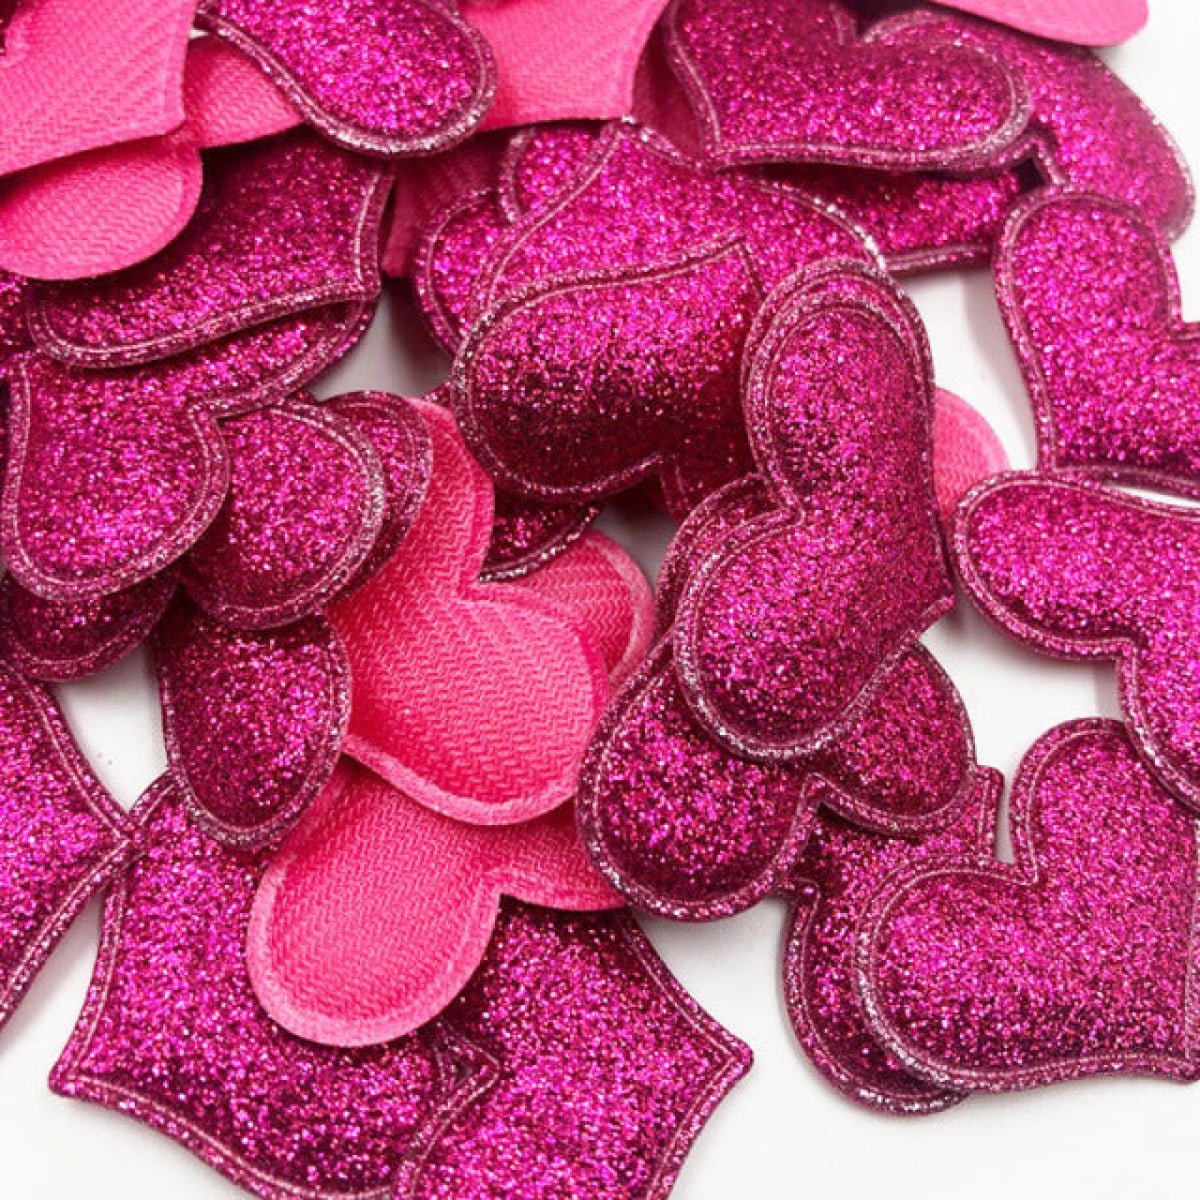 50pcs 35mmx30mm Glitter Padded Heart Felt Patches Appliques For Clothing Sewing DIY Wedding Decoration Toy Craft Shapes PU Leather - Hot Pink - - Asia Sell